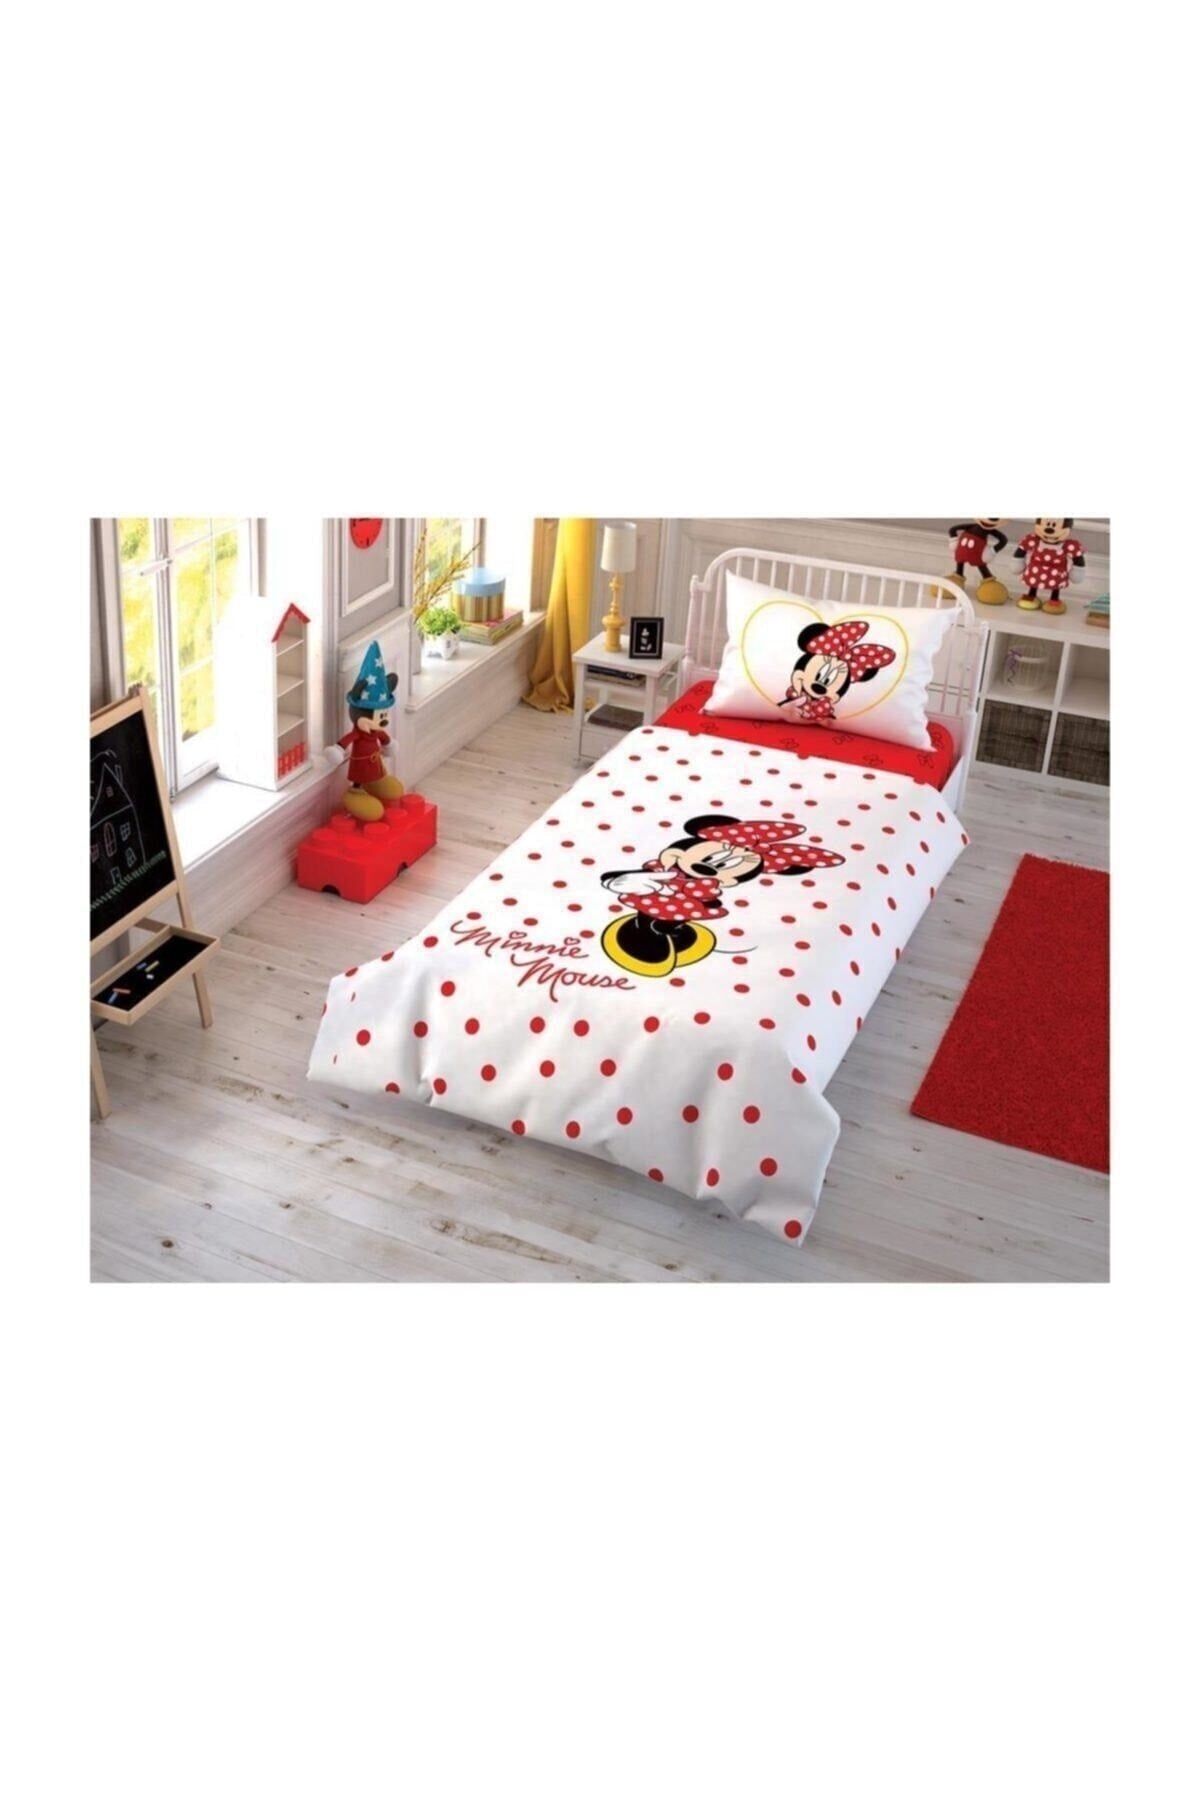 Licensed Minnie Mouse Check Single Duvet Cover Set